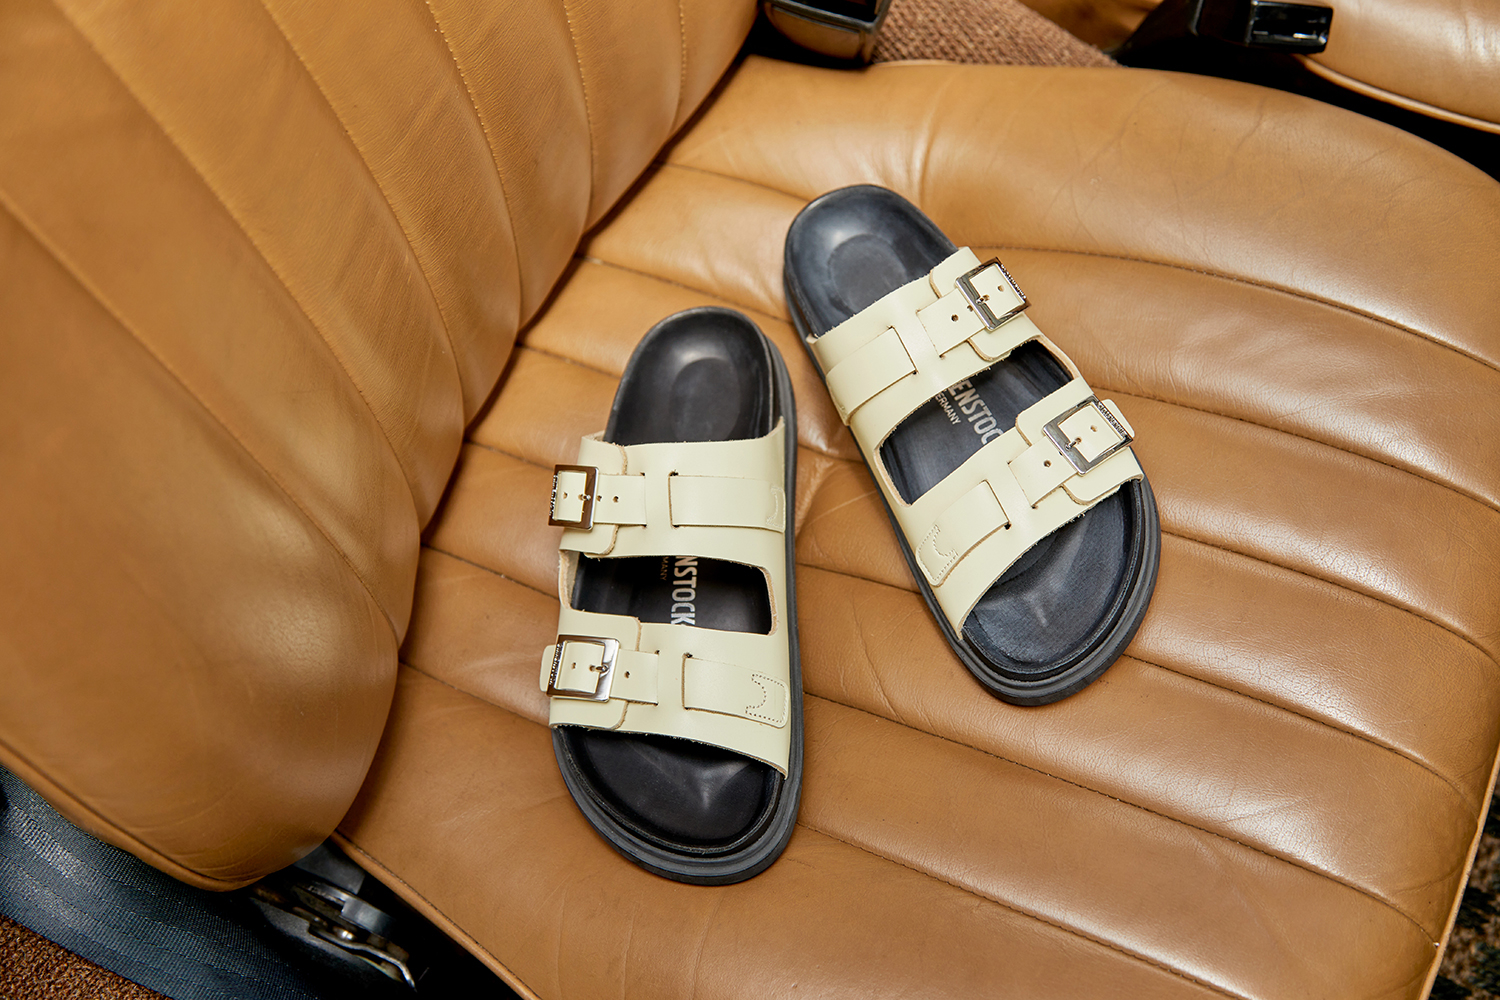 Birkenstock's St. Barths sandal in a white color with two straps, silver buckles, and a black footbed